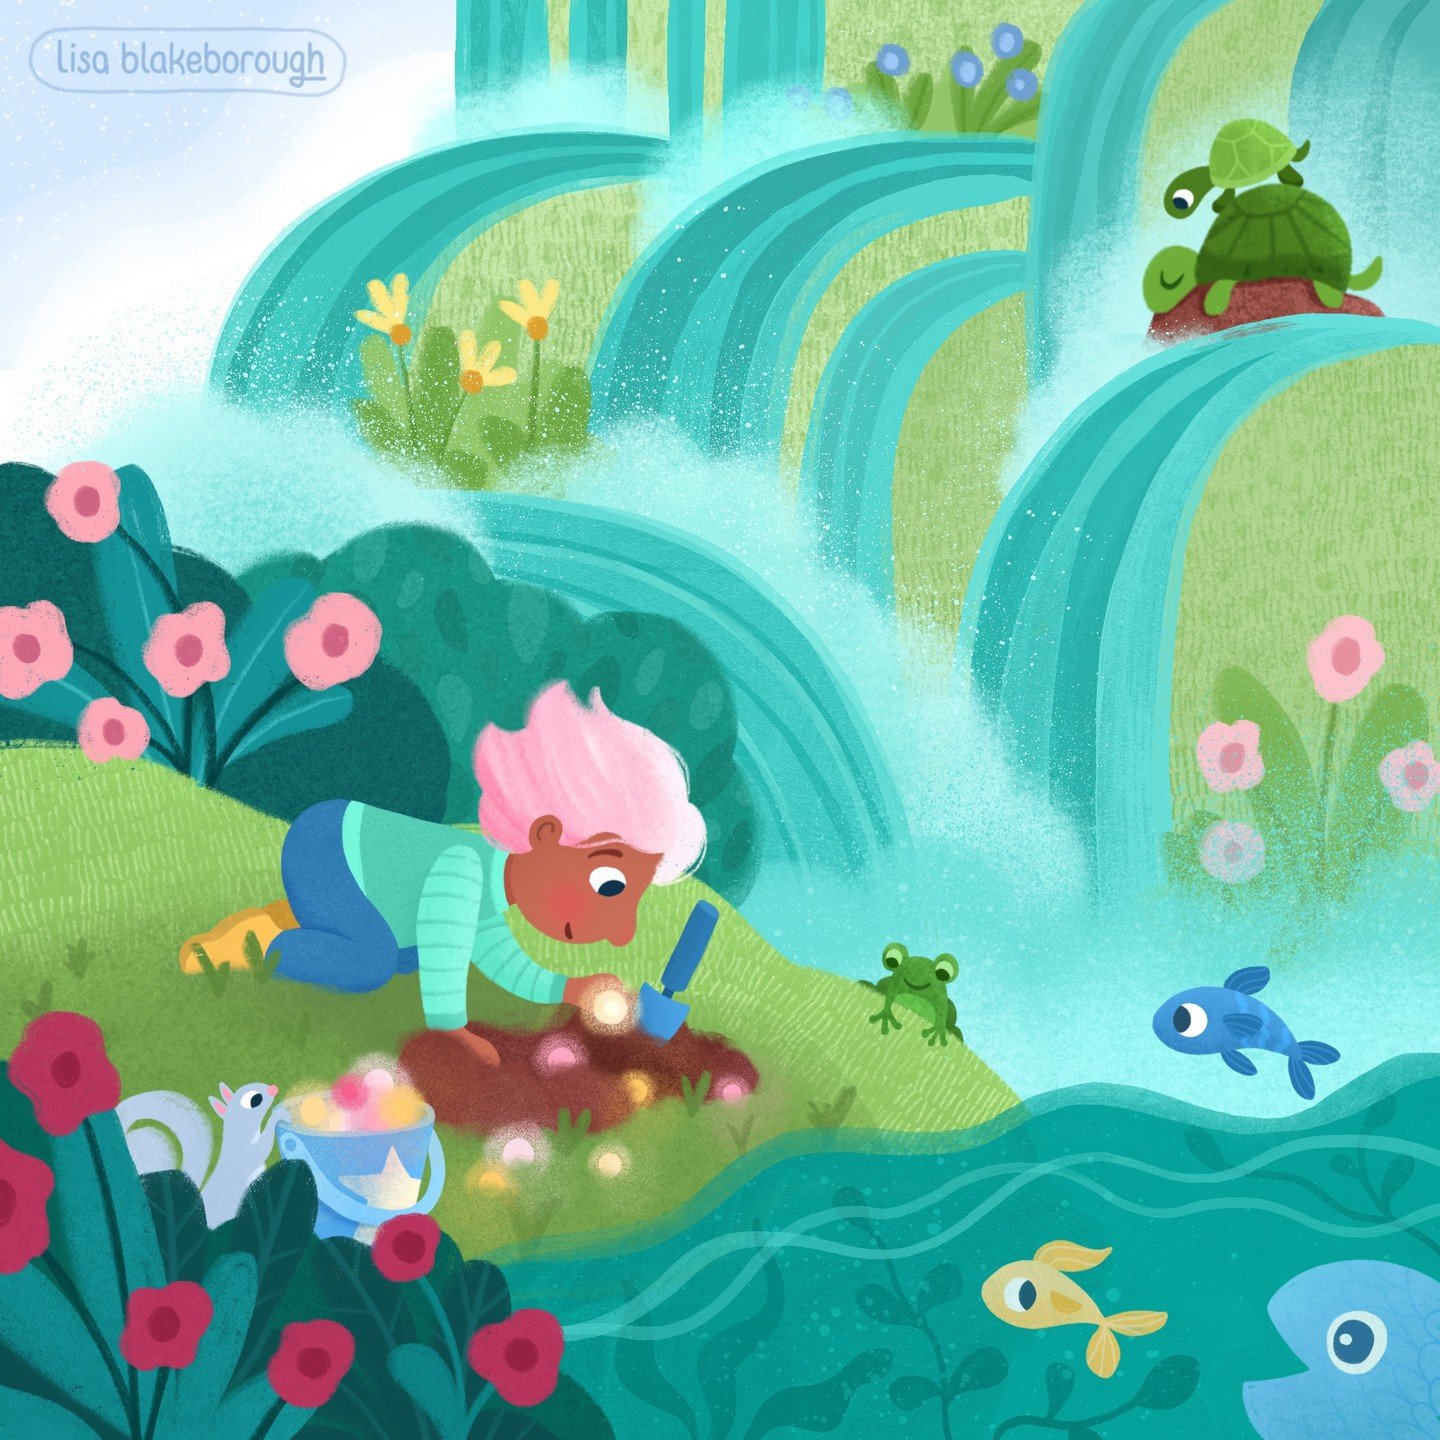 Hi! Here's my illustration for prompt #2 of #OurPlanetWeek2024: Below the water. Or in this case, below the waterfall 💦🌸

I'm really enjoying seeing everyone's beautiful water themed posts!

For this one I decided to continue the story of this Litt